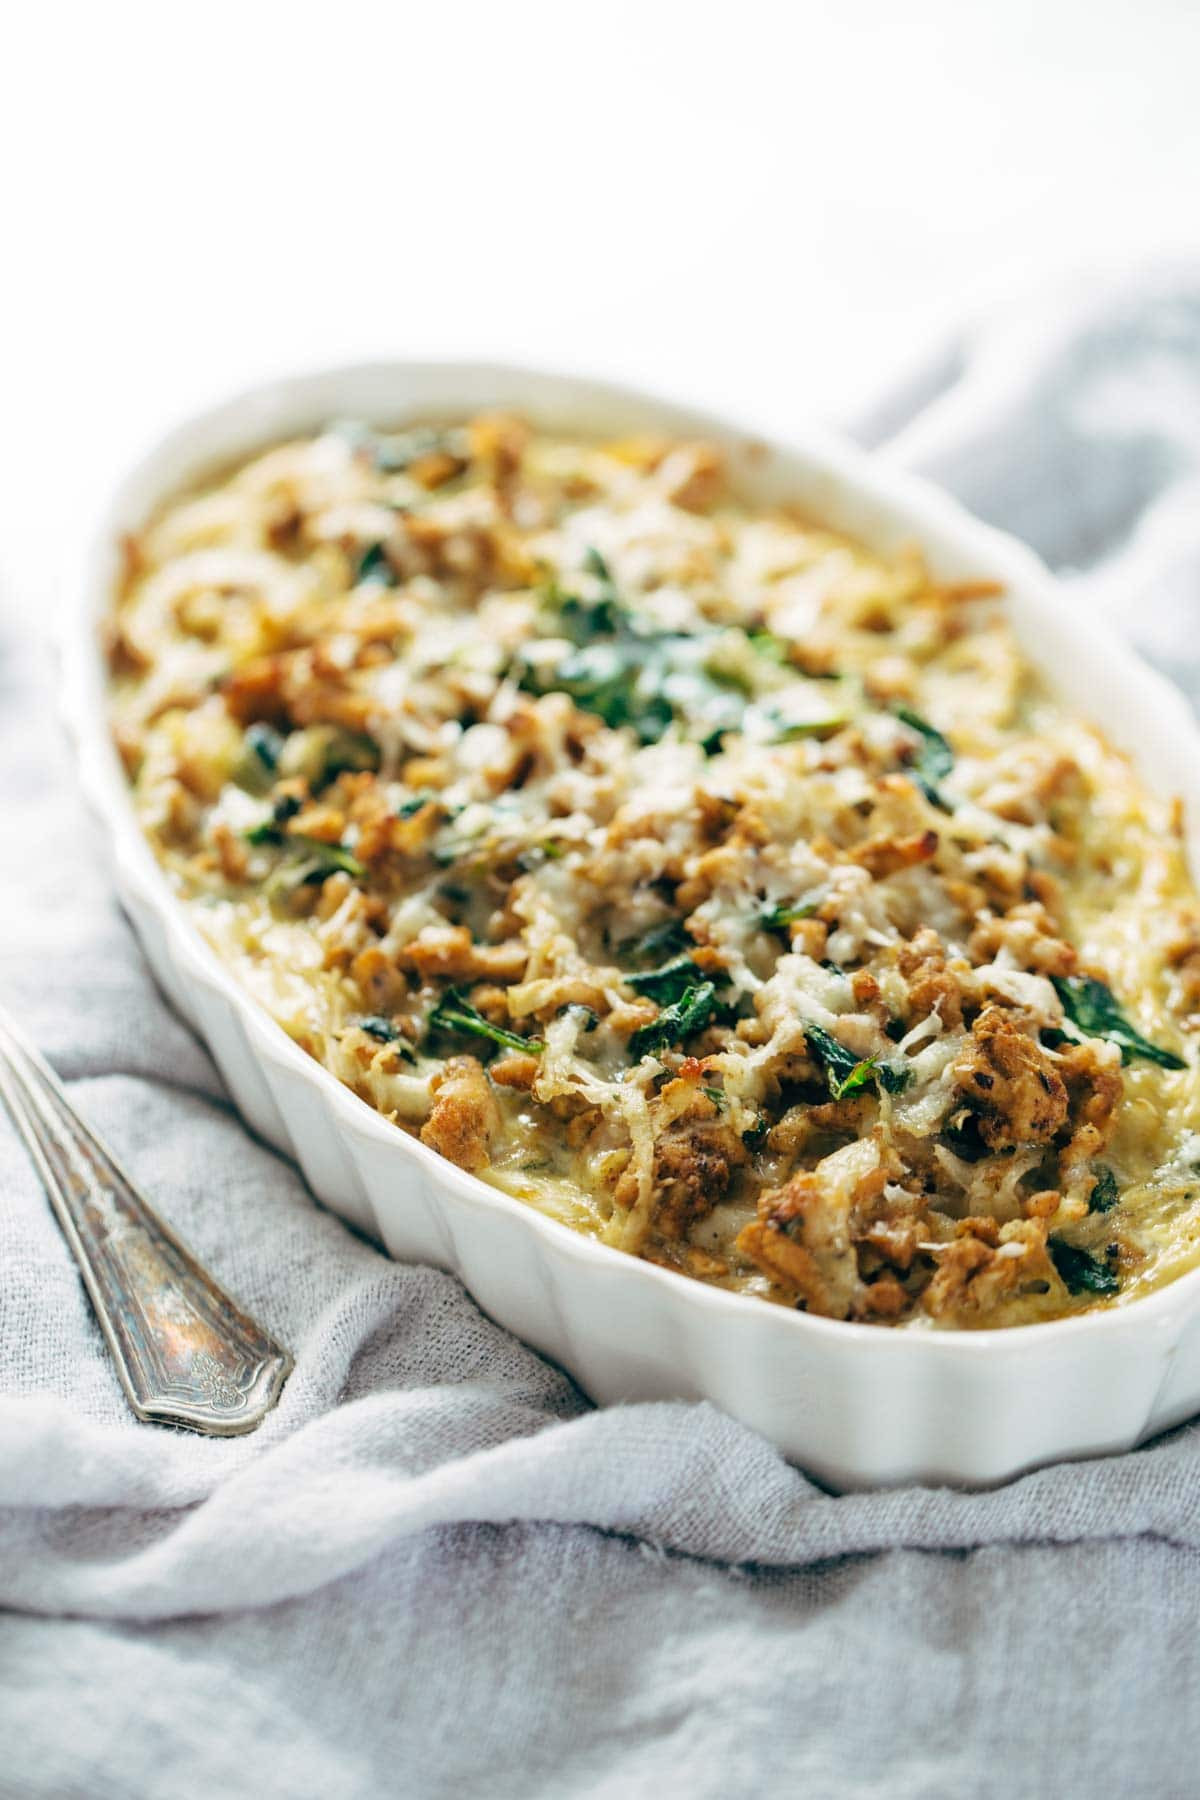 Healthy Breakfast Casserole With Spinach
 Creamy Spinach and Potato Breakfast Casserole Recipe